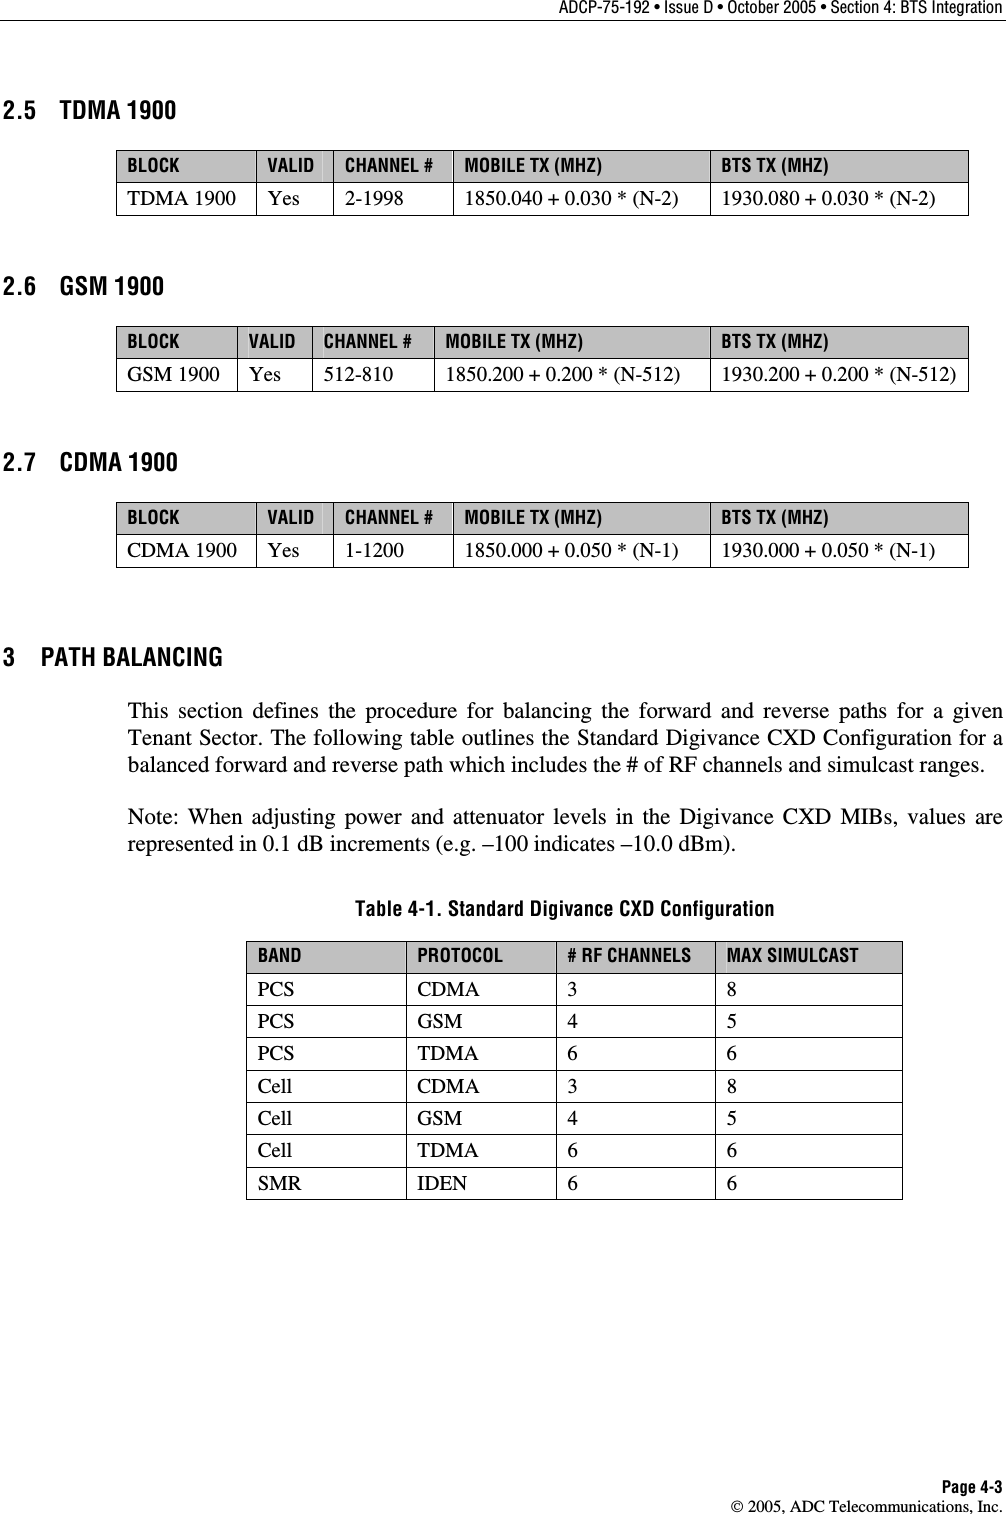 ADCP-75-192 • Issue D • October 2005 • Section 4: BTS Integration Page 4-3  2005, ADC Telecommunications, Inc. 2.5 TDMA 1900 BLOCK  VALID  CHANNEL #  MOBILE TX (MHZ)  BTS TX (MHZ) TDMA 1900  Yes  2-1998  1850.040 + 0.030 * (N-2)  1930.080 + 0.030 * (N-2)  2.6 GSM 1900 BLOCK  VALID  CHANNEL #  MOBILE TX (MHZ)  BTS TX (MHZ) GSM 1900  Yes  512-810  1850.200 + 0.200 * (N-512)  1930.200 + 0.200 * (N-512)  2.7 CDMA 1900 BLOCK  VALID  CHANNEL #  MOBILE TX (MHZ)  BTS TX (MHZ) CDMA 1900  Yes  1-1200  1850.000 + 0.050 * (N-1)  1930.000 + 0.050 * (N-1)  3 PATH BALANCING This section defines the procedure for balancing the forward and reverse paths for a given Tenant Sector. The following table outlines the Standard Digivance CXD Configuration for a balanced forward and reverse path which includes the # of RF channels and simulcast ranges. Note: When adjusting power and attenuator levels in the Digivance CXD MIBs, values are represented in 0.1 dB increments (e.g. –100 indicates –10.0 dBm). Table 4-1. Standard Digivance CXD Configuration BAND  PROTOCOL  # RF CHANNELS  MAX SIMULCAST PCS CDMA 3  8 PCS GSM 4  5 PCS TDMA 6  6 Cell CDMA 3  8 Cell GSM 4  5 Cell TDMA 6  6 SMR IDEN 6  6  